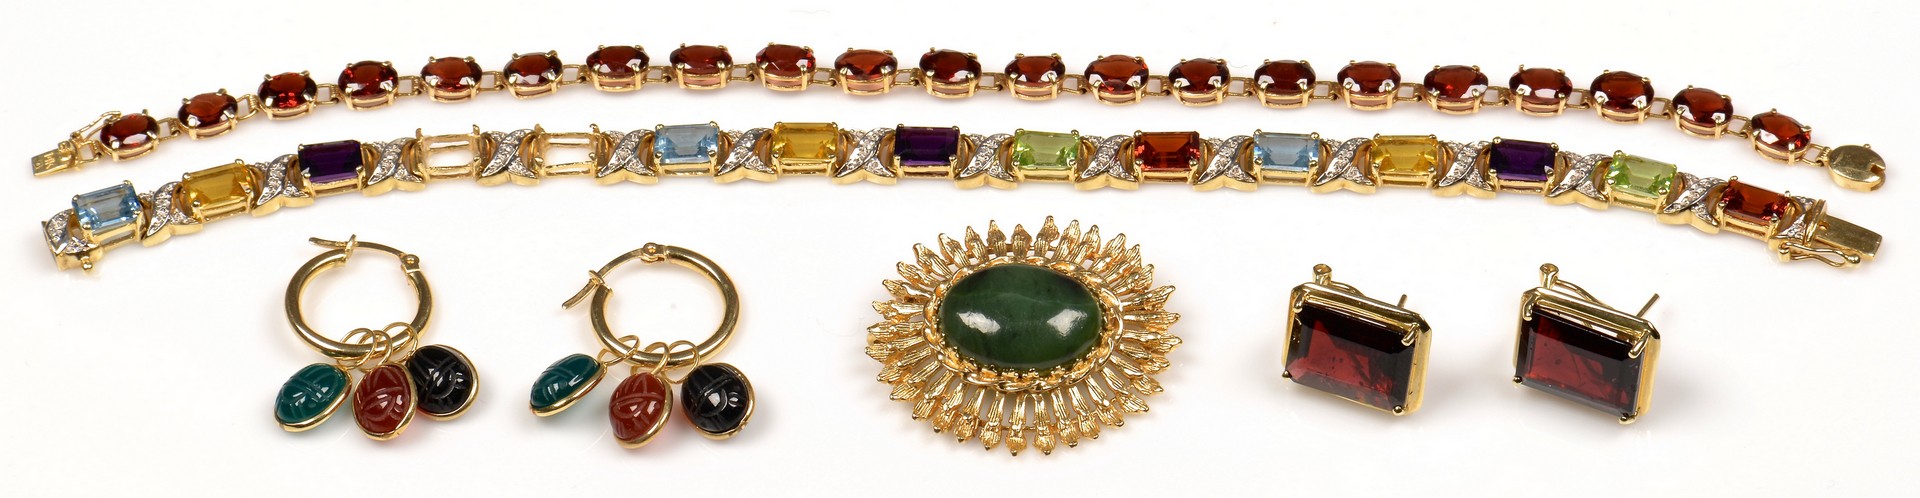 Lot 949: Grouping of 14K & Colored Stone Jewelry